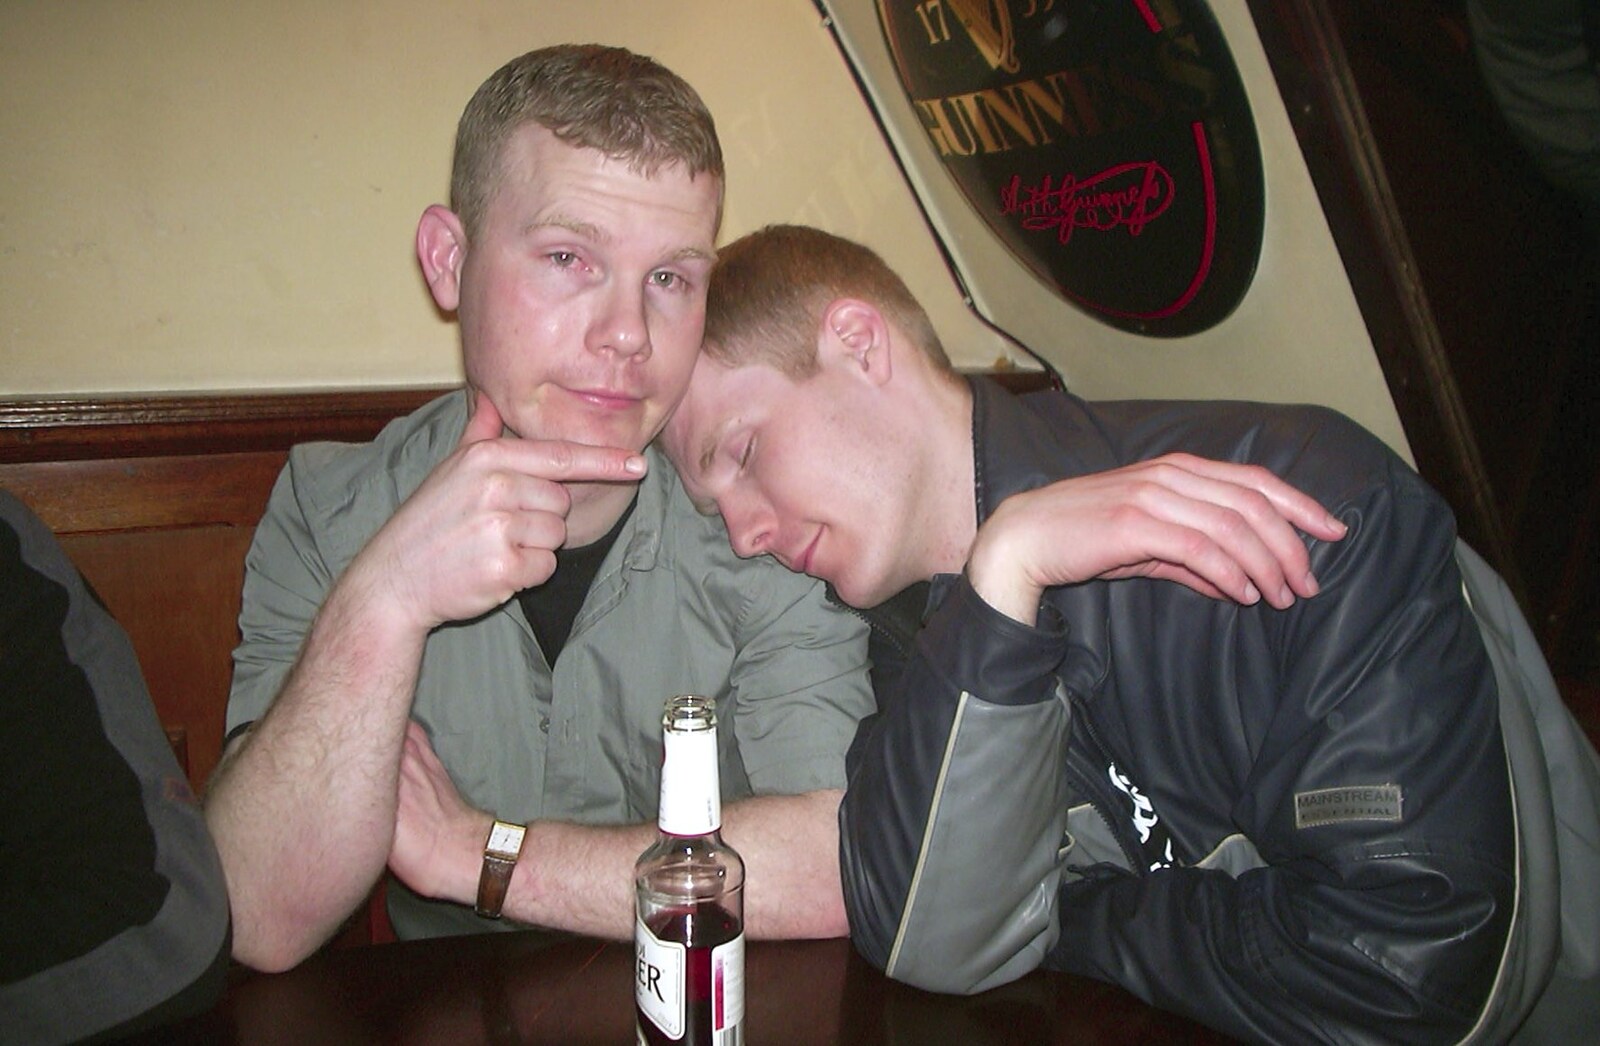 Andy has a kip from Anne Frank, Markets and Mikey-P's Stag Do, Amsterdam, Netherlands - 6th March 2004